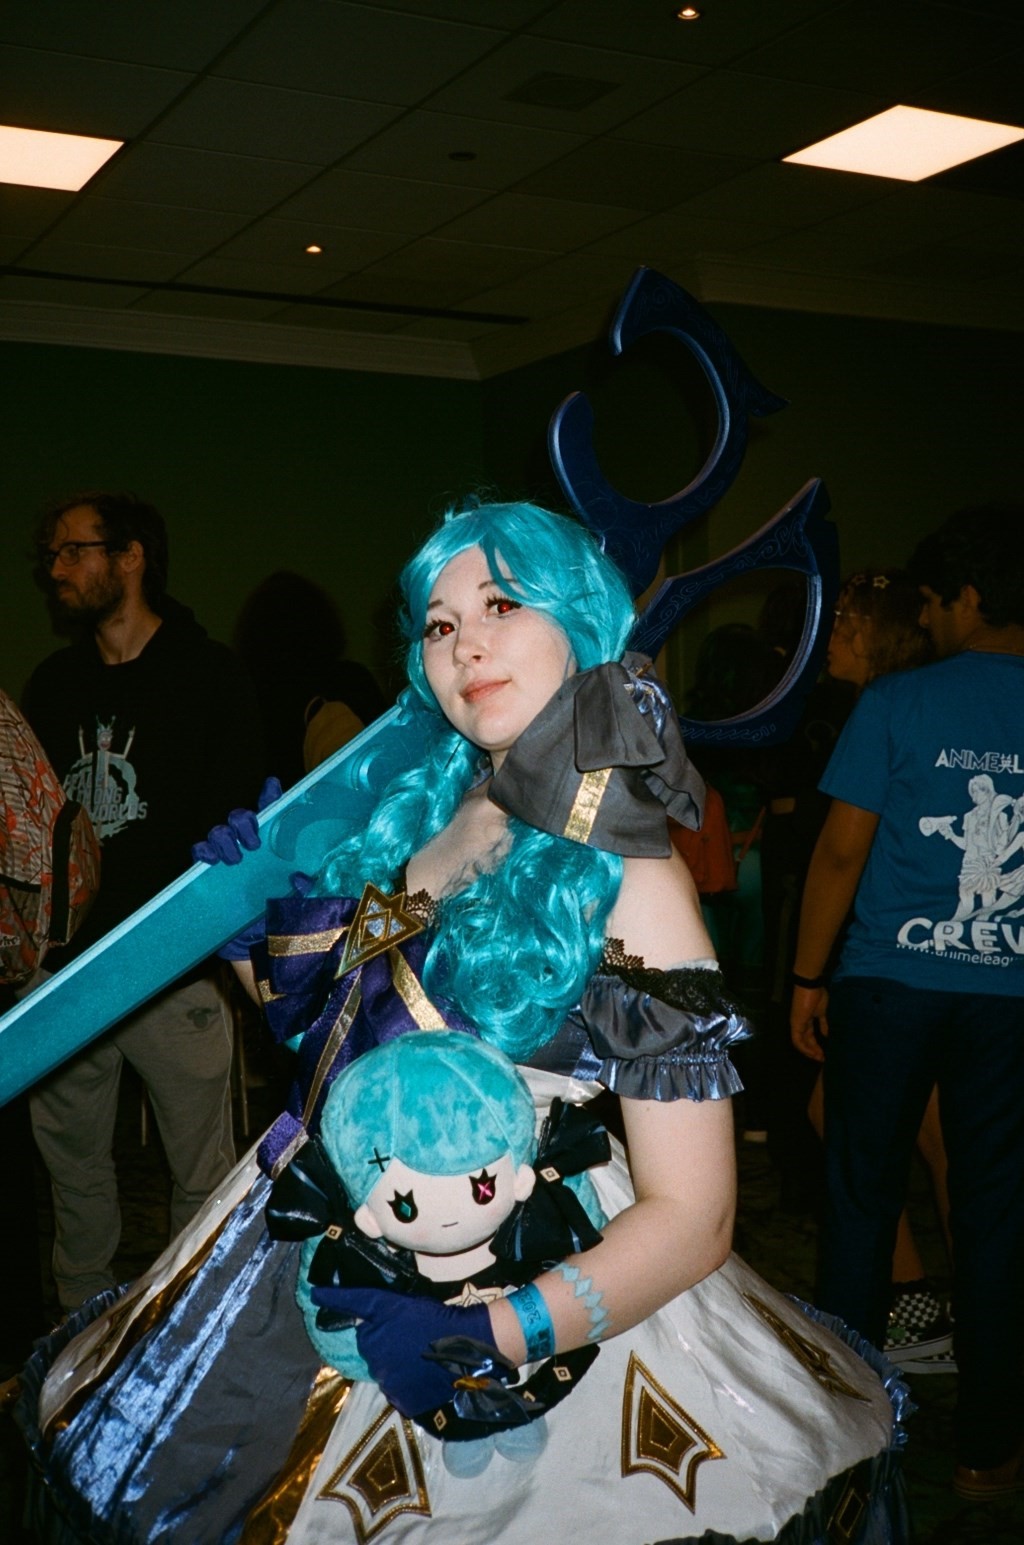 Kami-Con, Alabama's largest anime convention, has Tuscaloosa roots